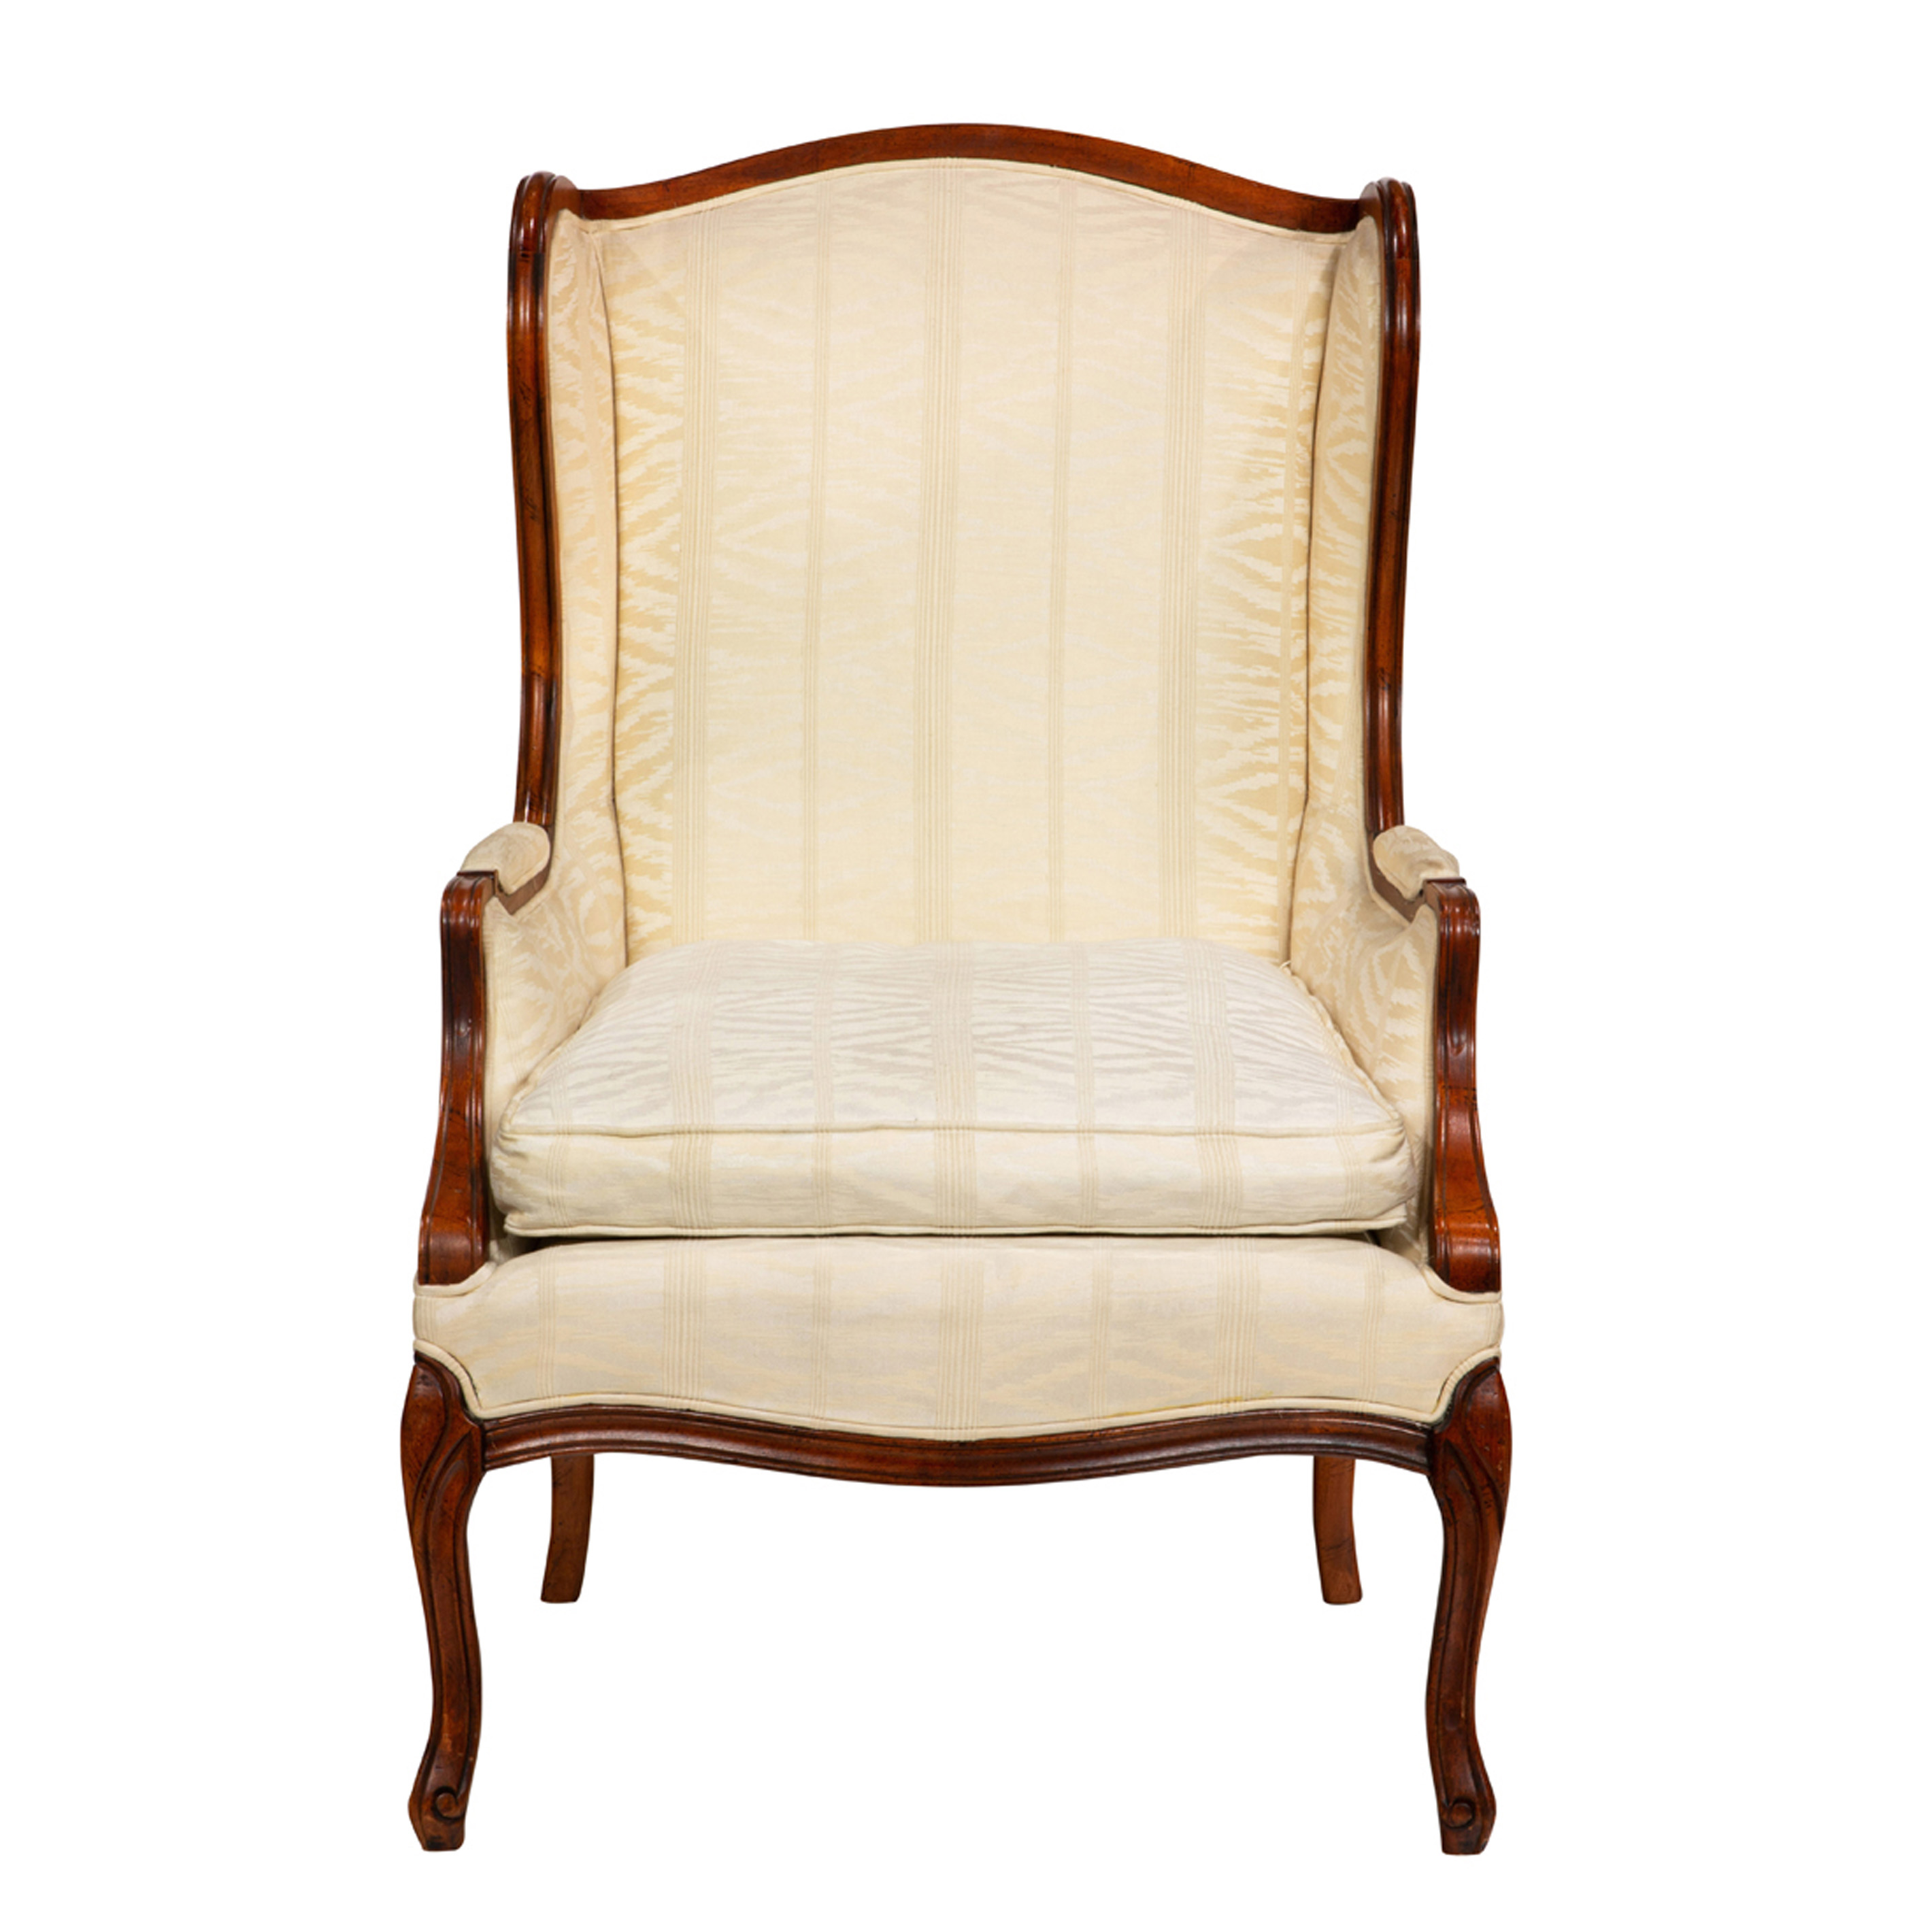 A QUEEN ANNE STYLE WING BACK ARMCHAIR